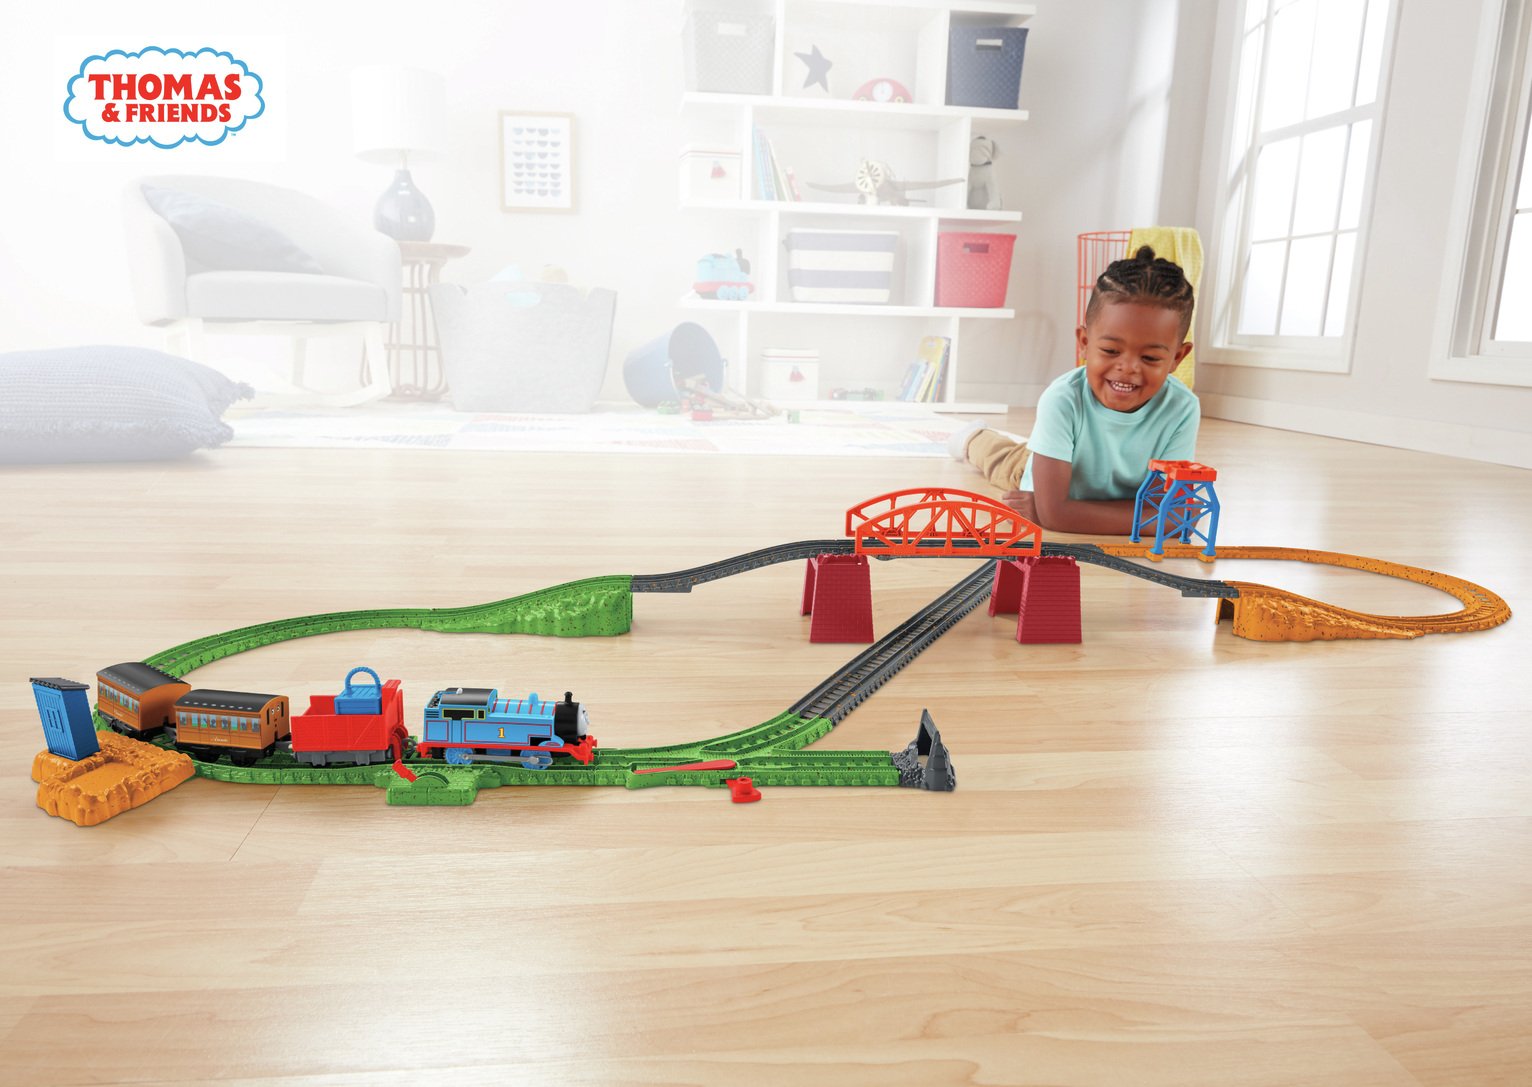 Thomas & Friends 3-in-1 Playset Review